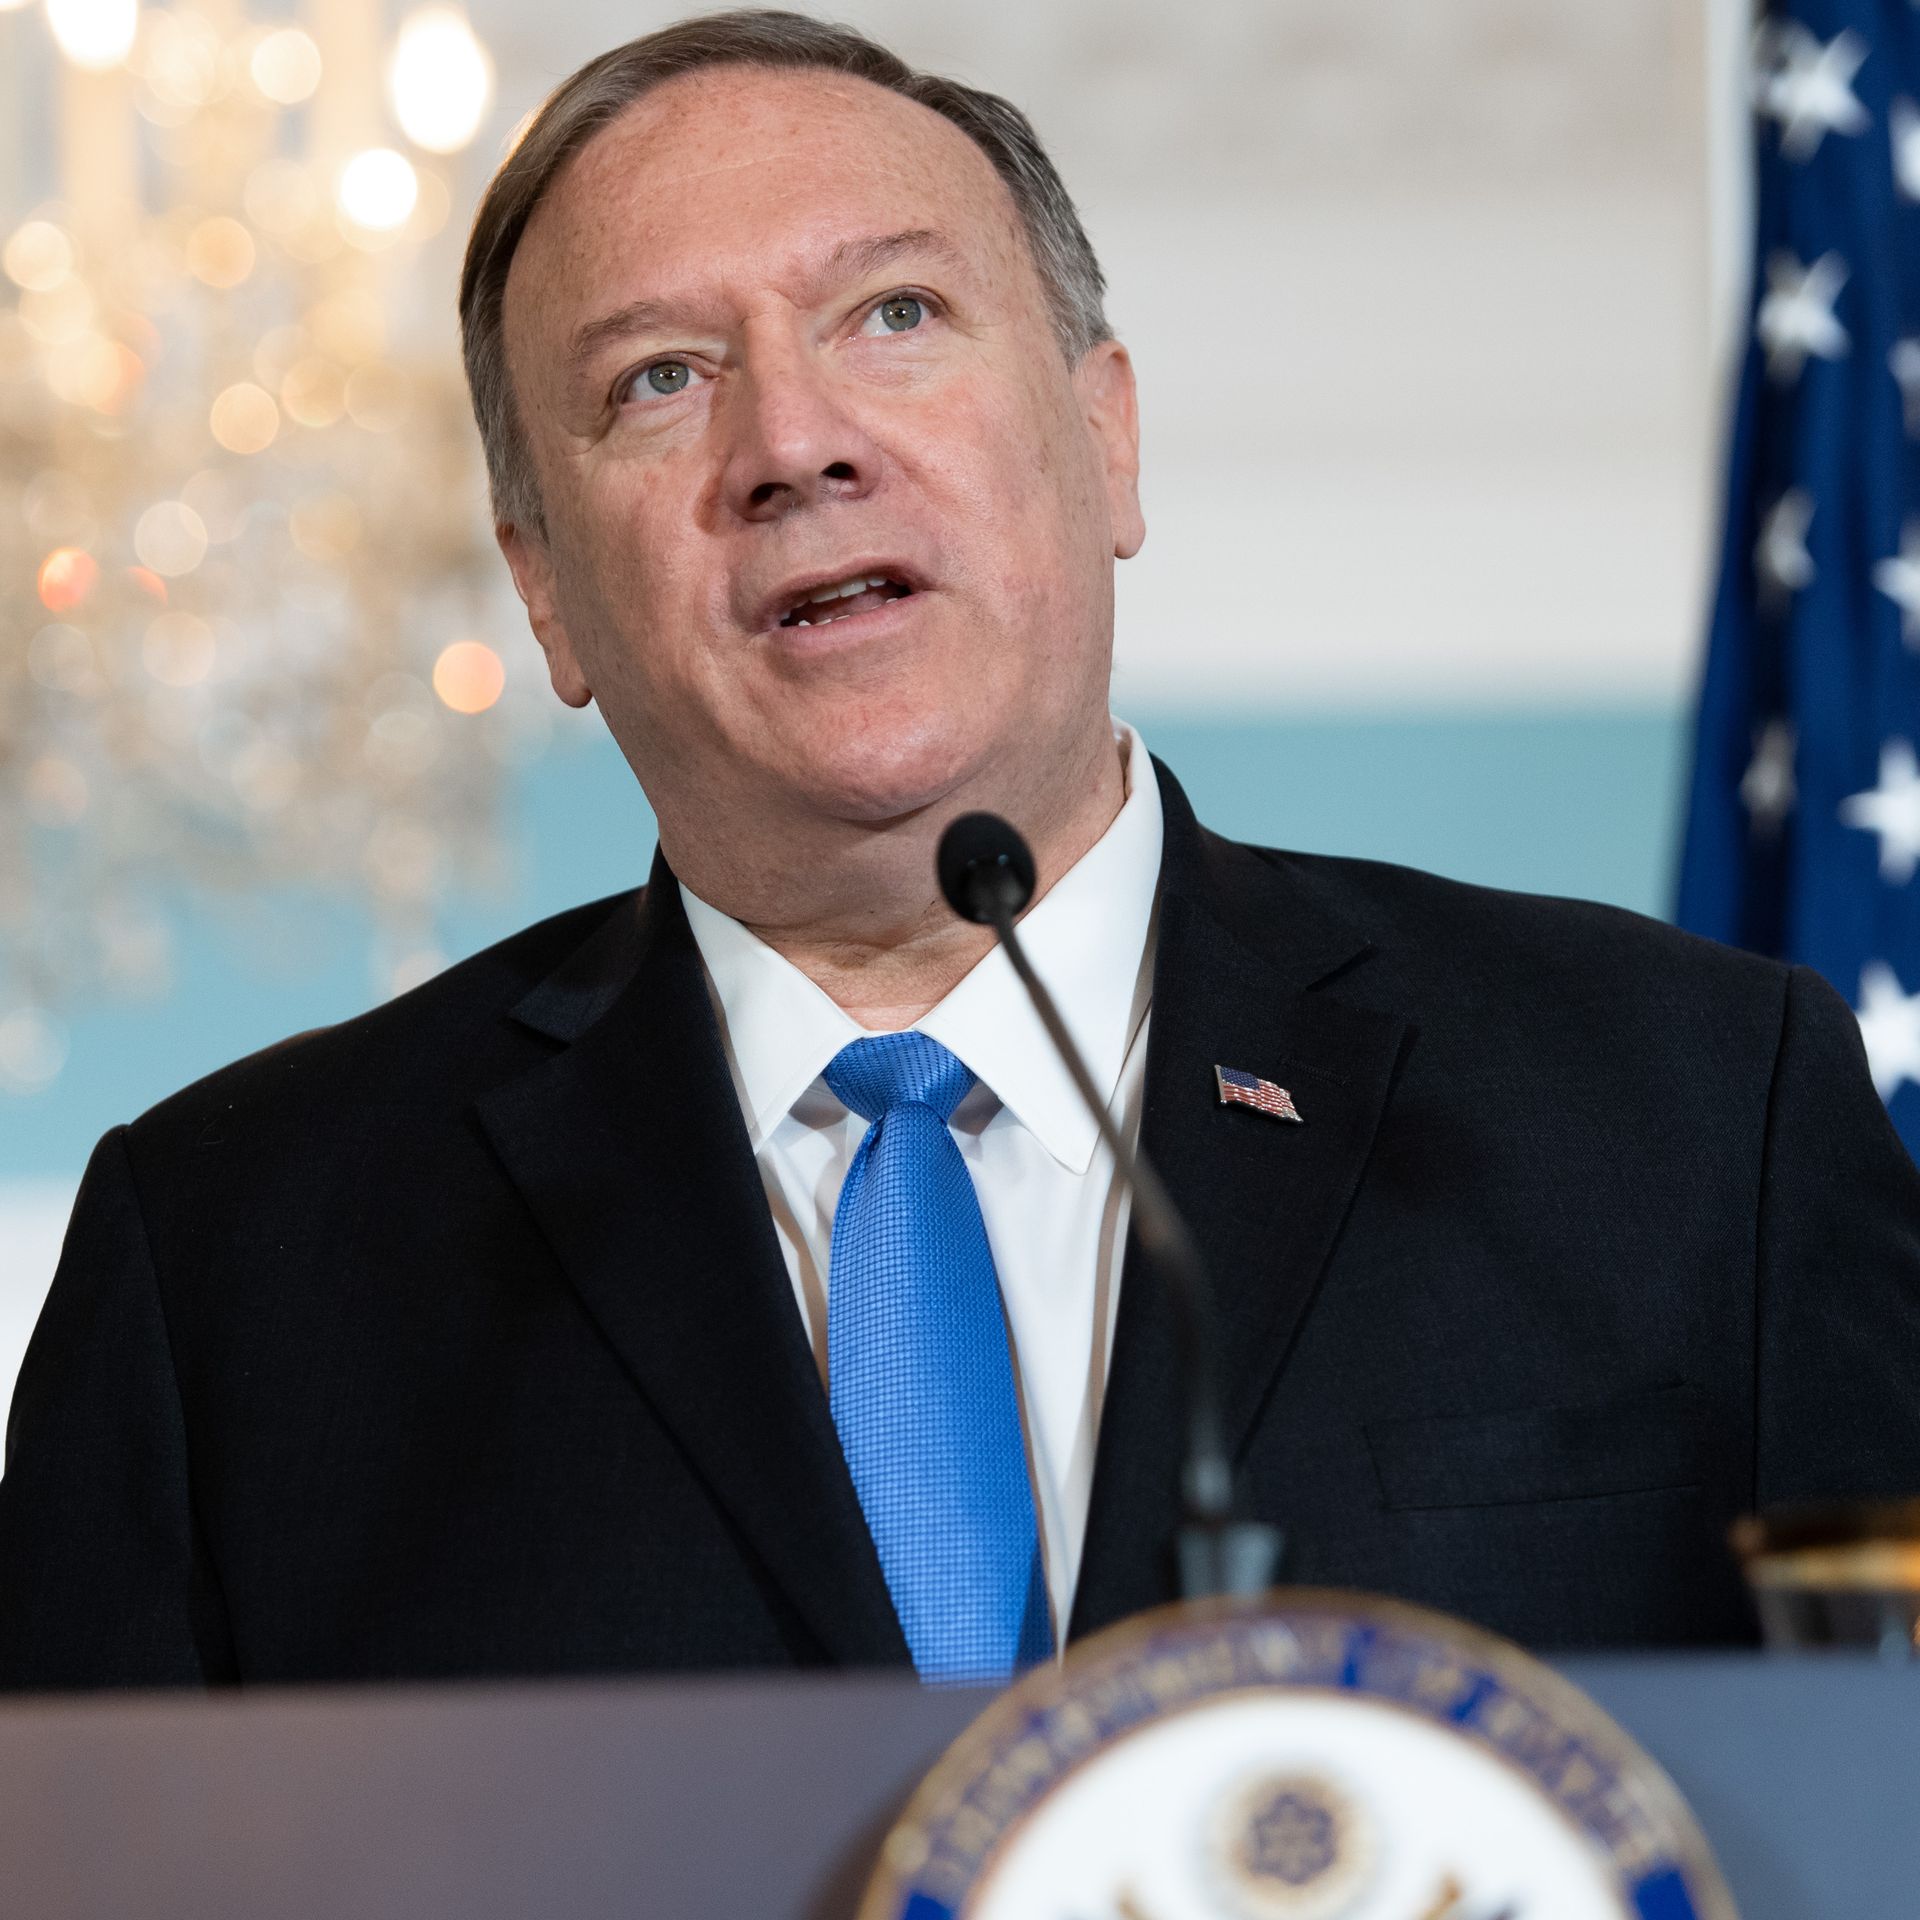 Mike Pompeo speaking at a lectern in front of an American flag